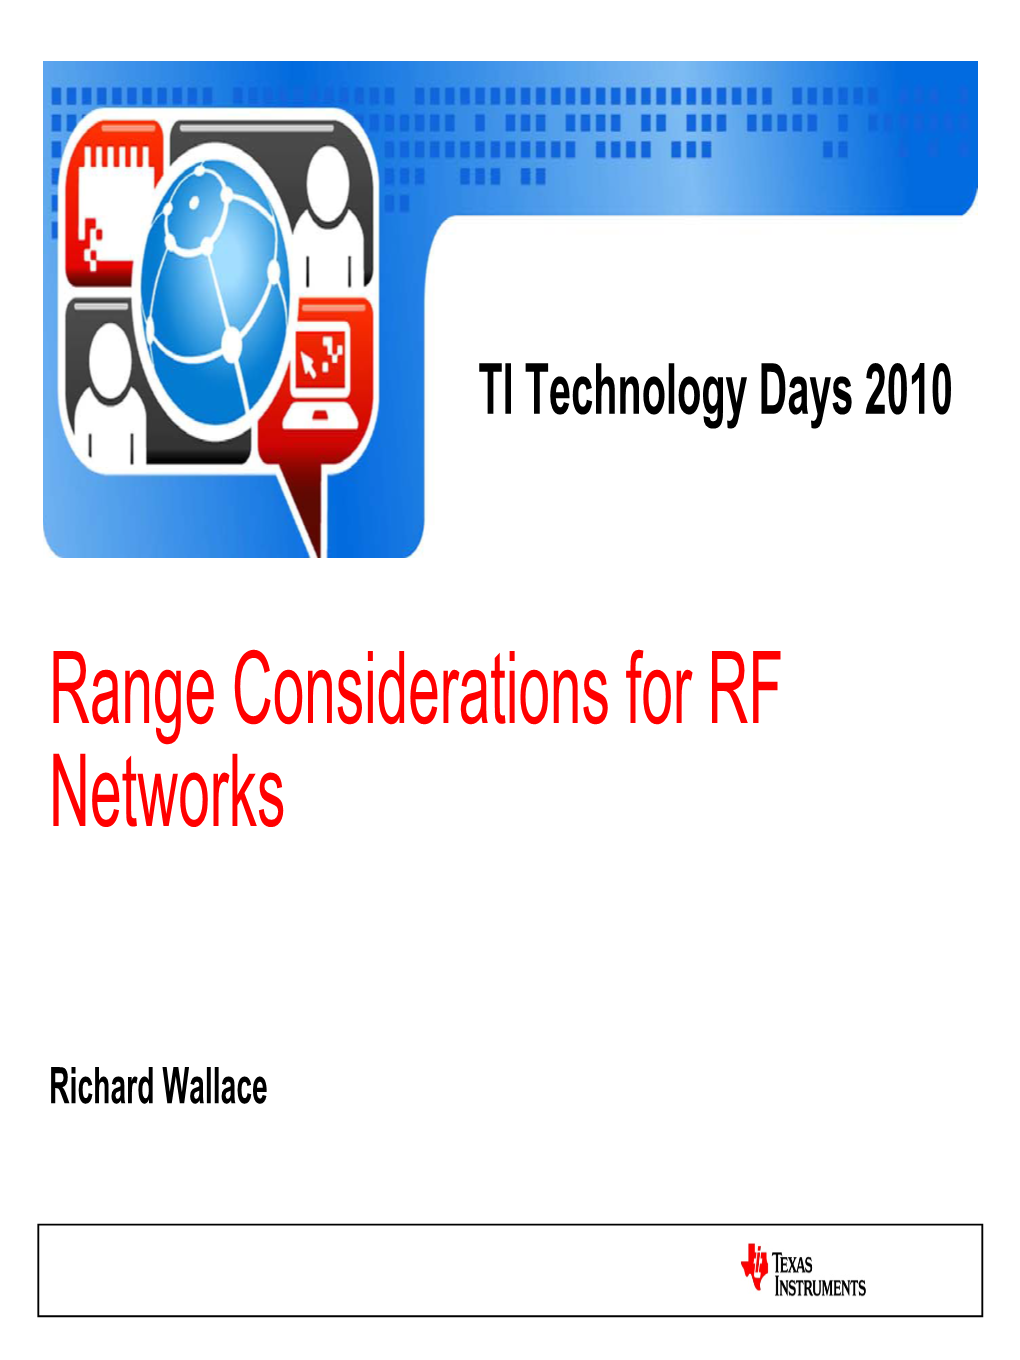 Range Considerations for RF Networks.Pdf